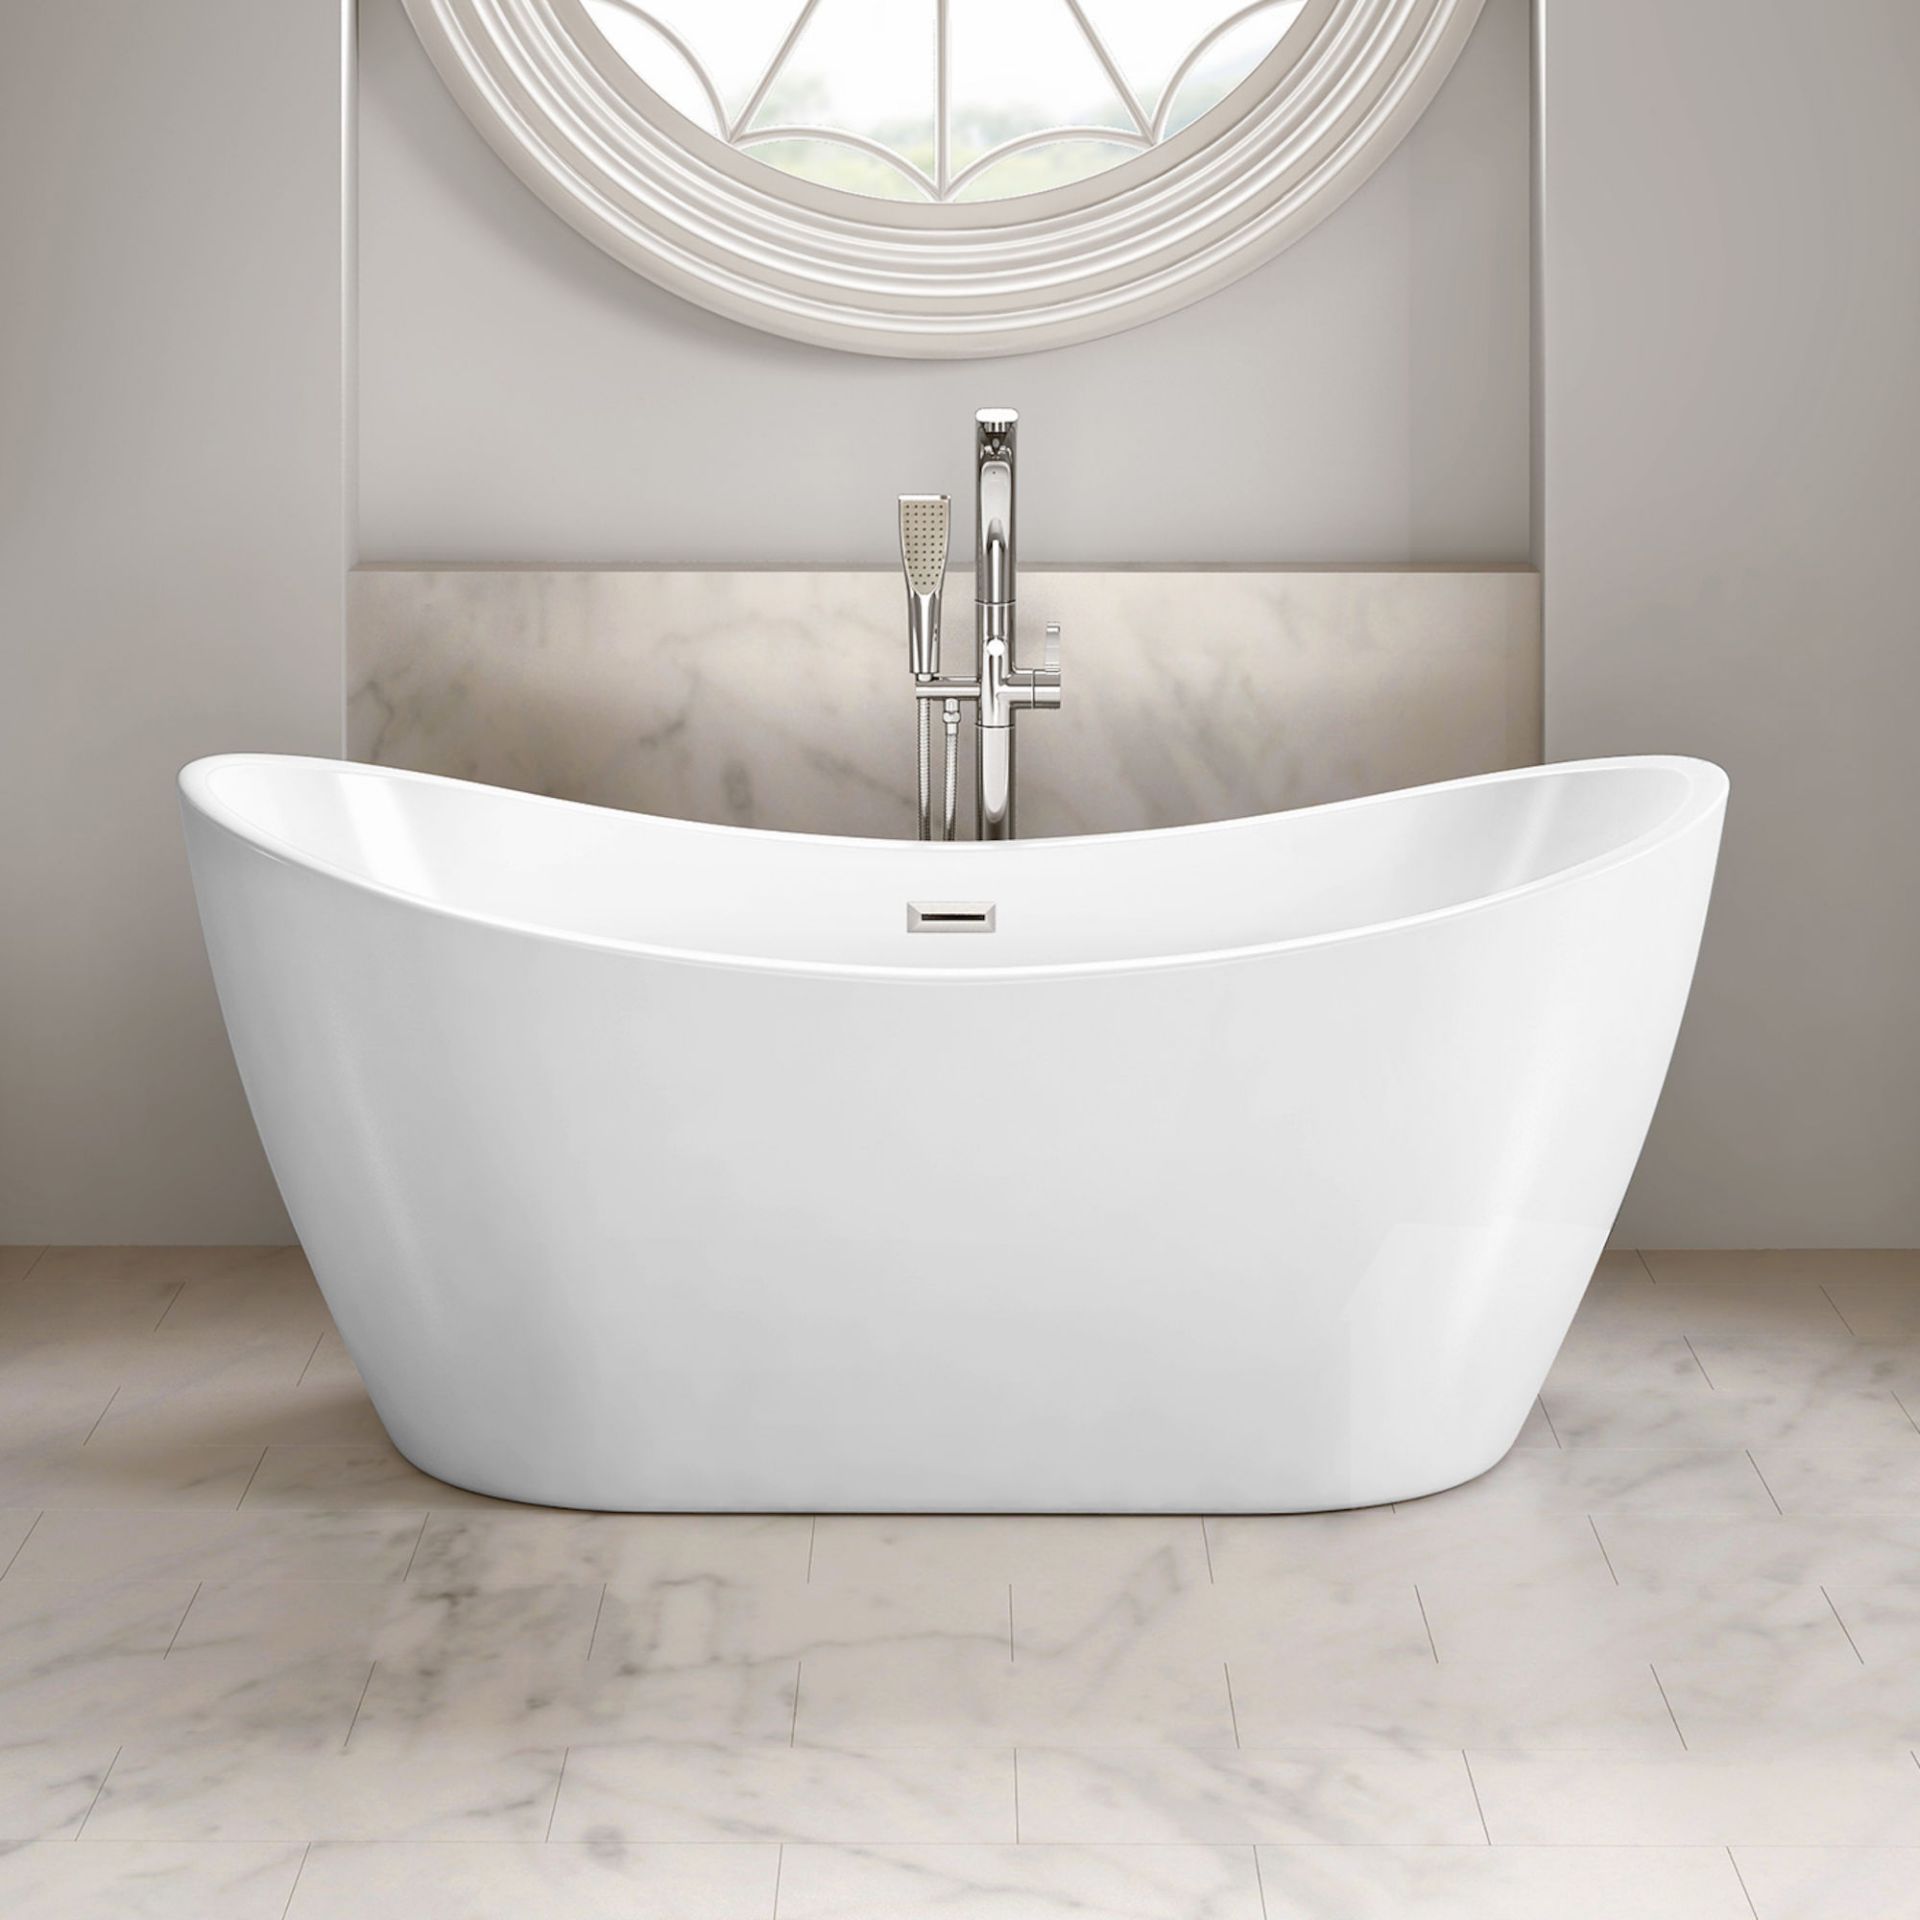 1700mmx710mm Caitlyn Freestanding Bath. Visually simplistic to suit any bathroom interior witho...